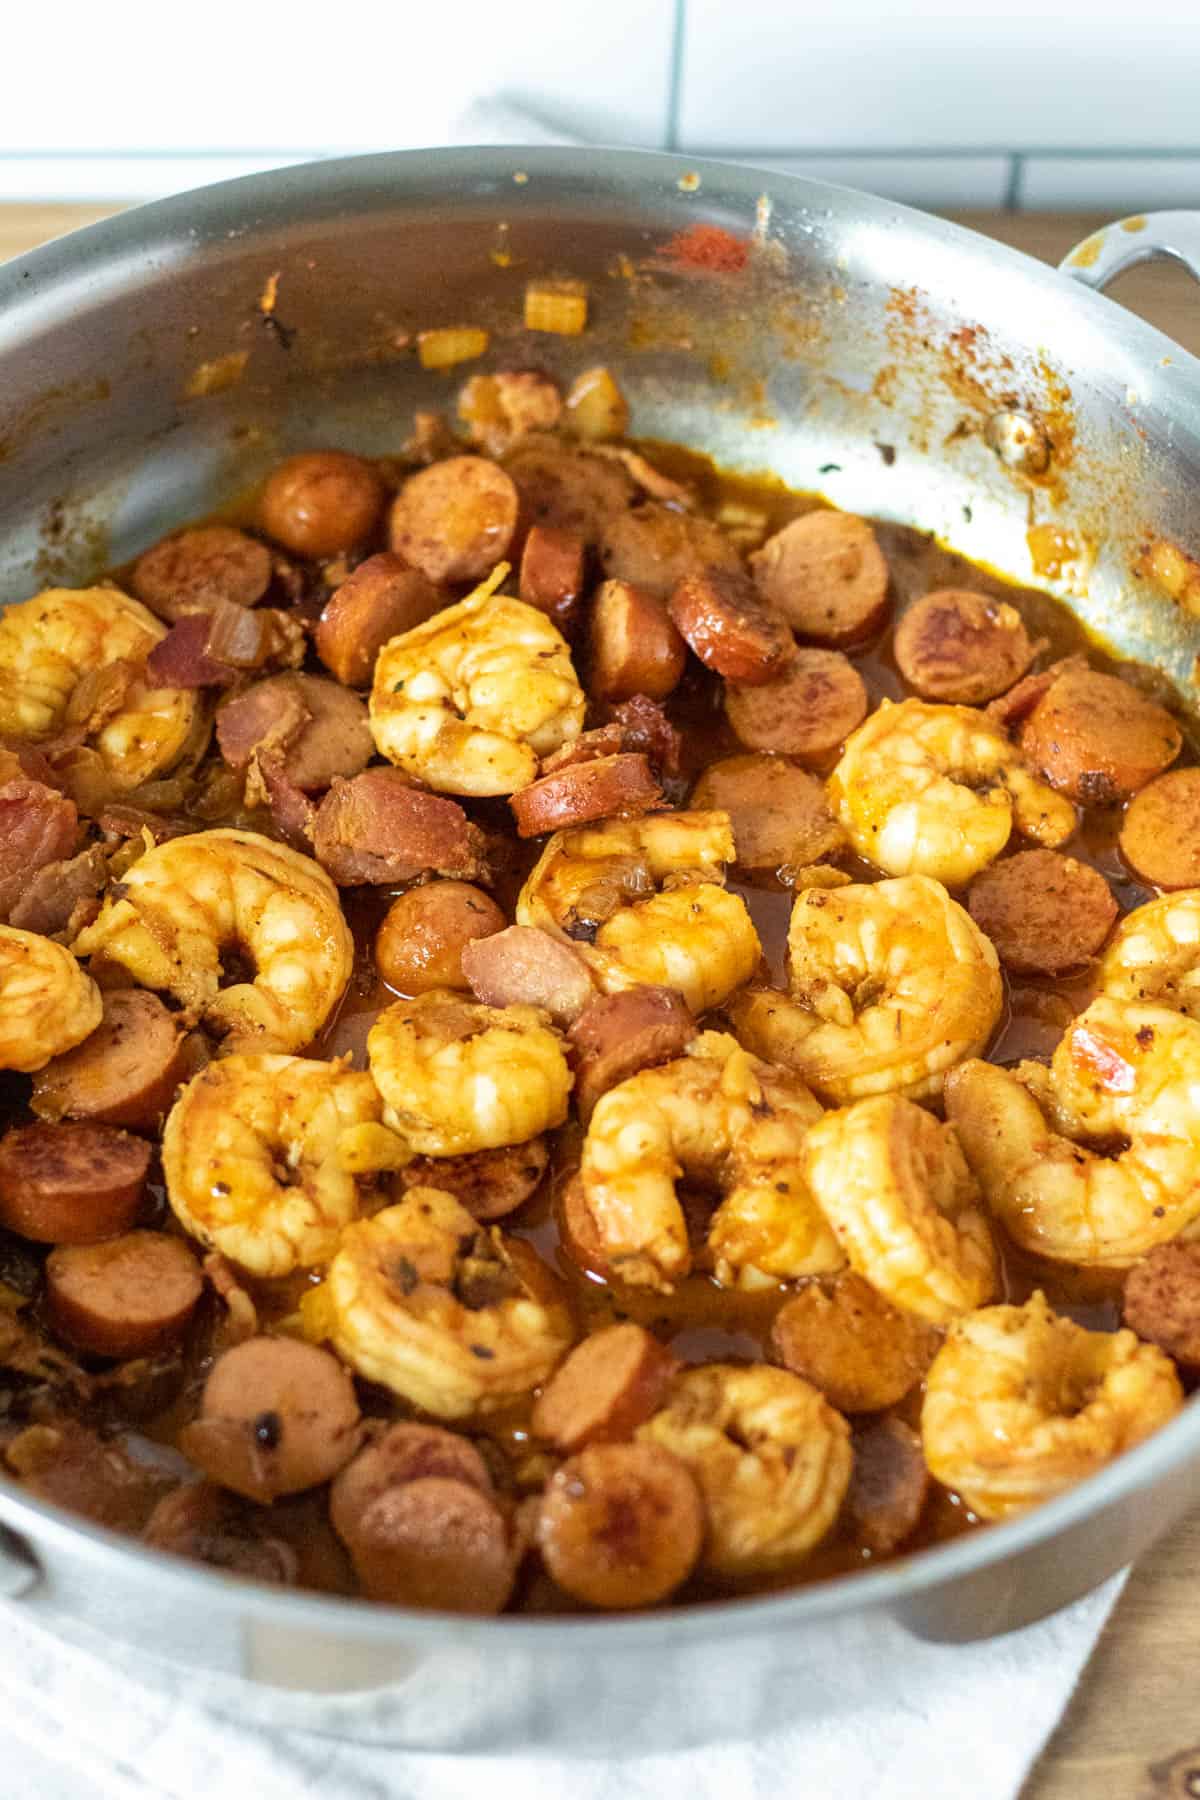 Finished shrimp and sausage mixture in pan.